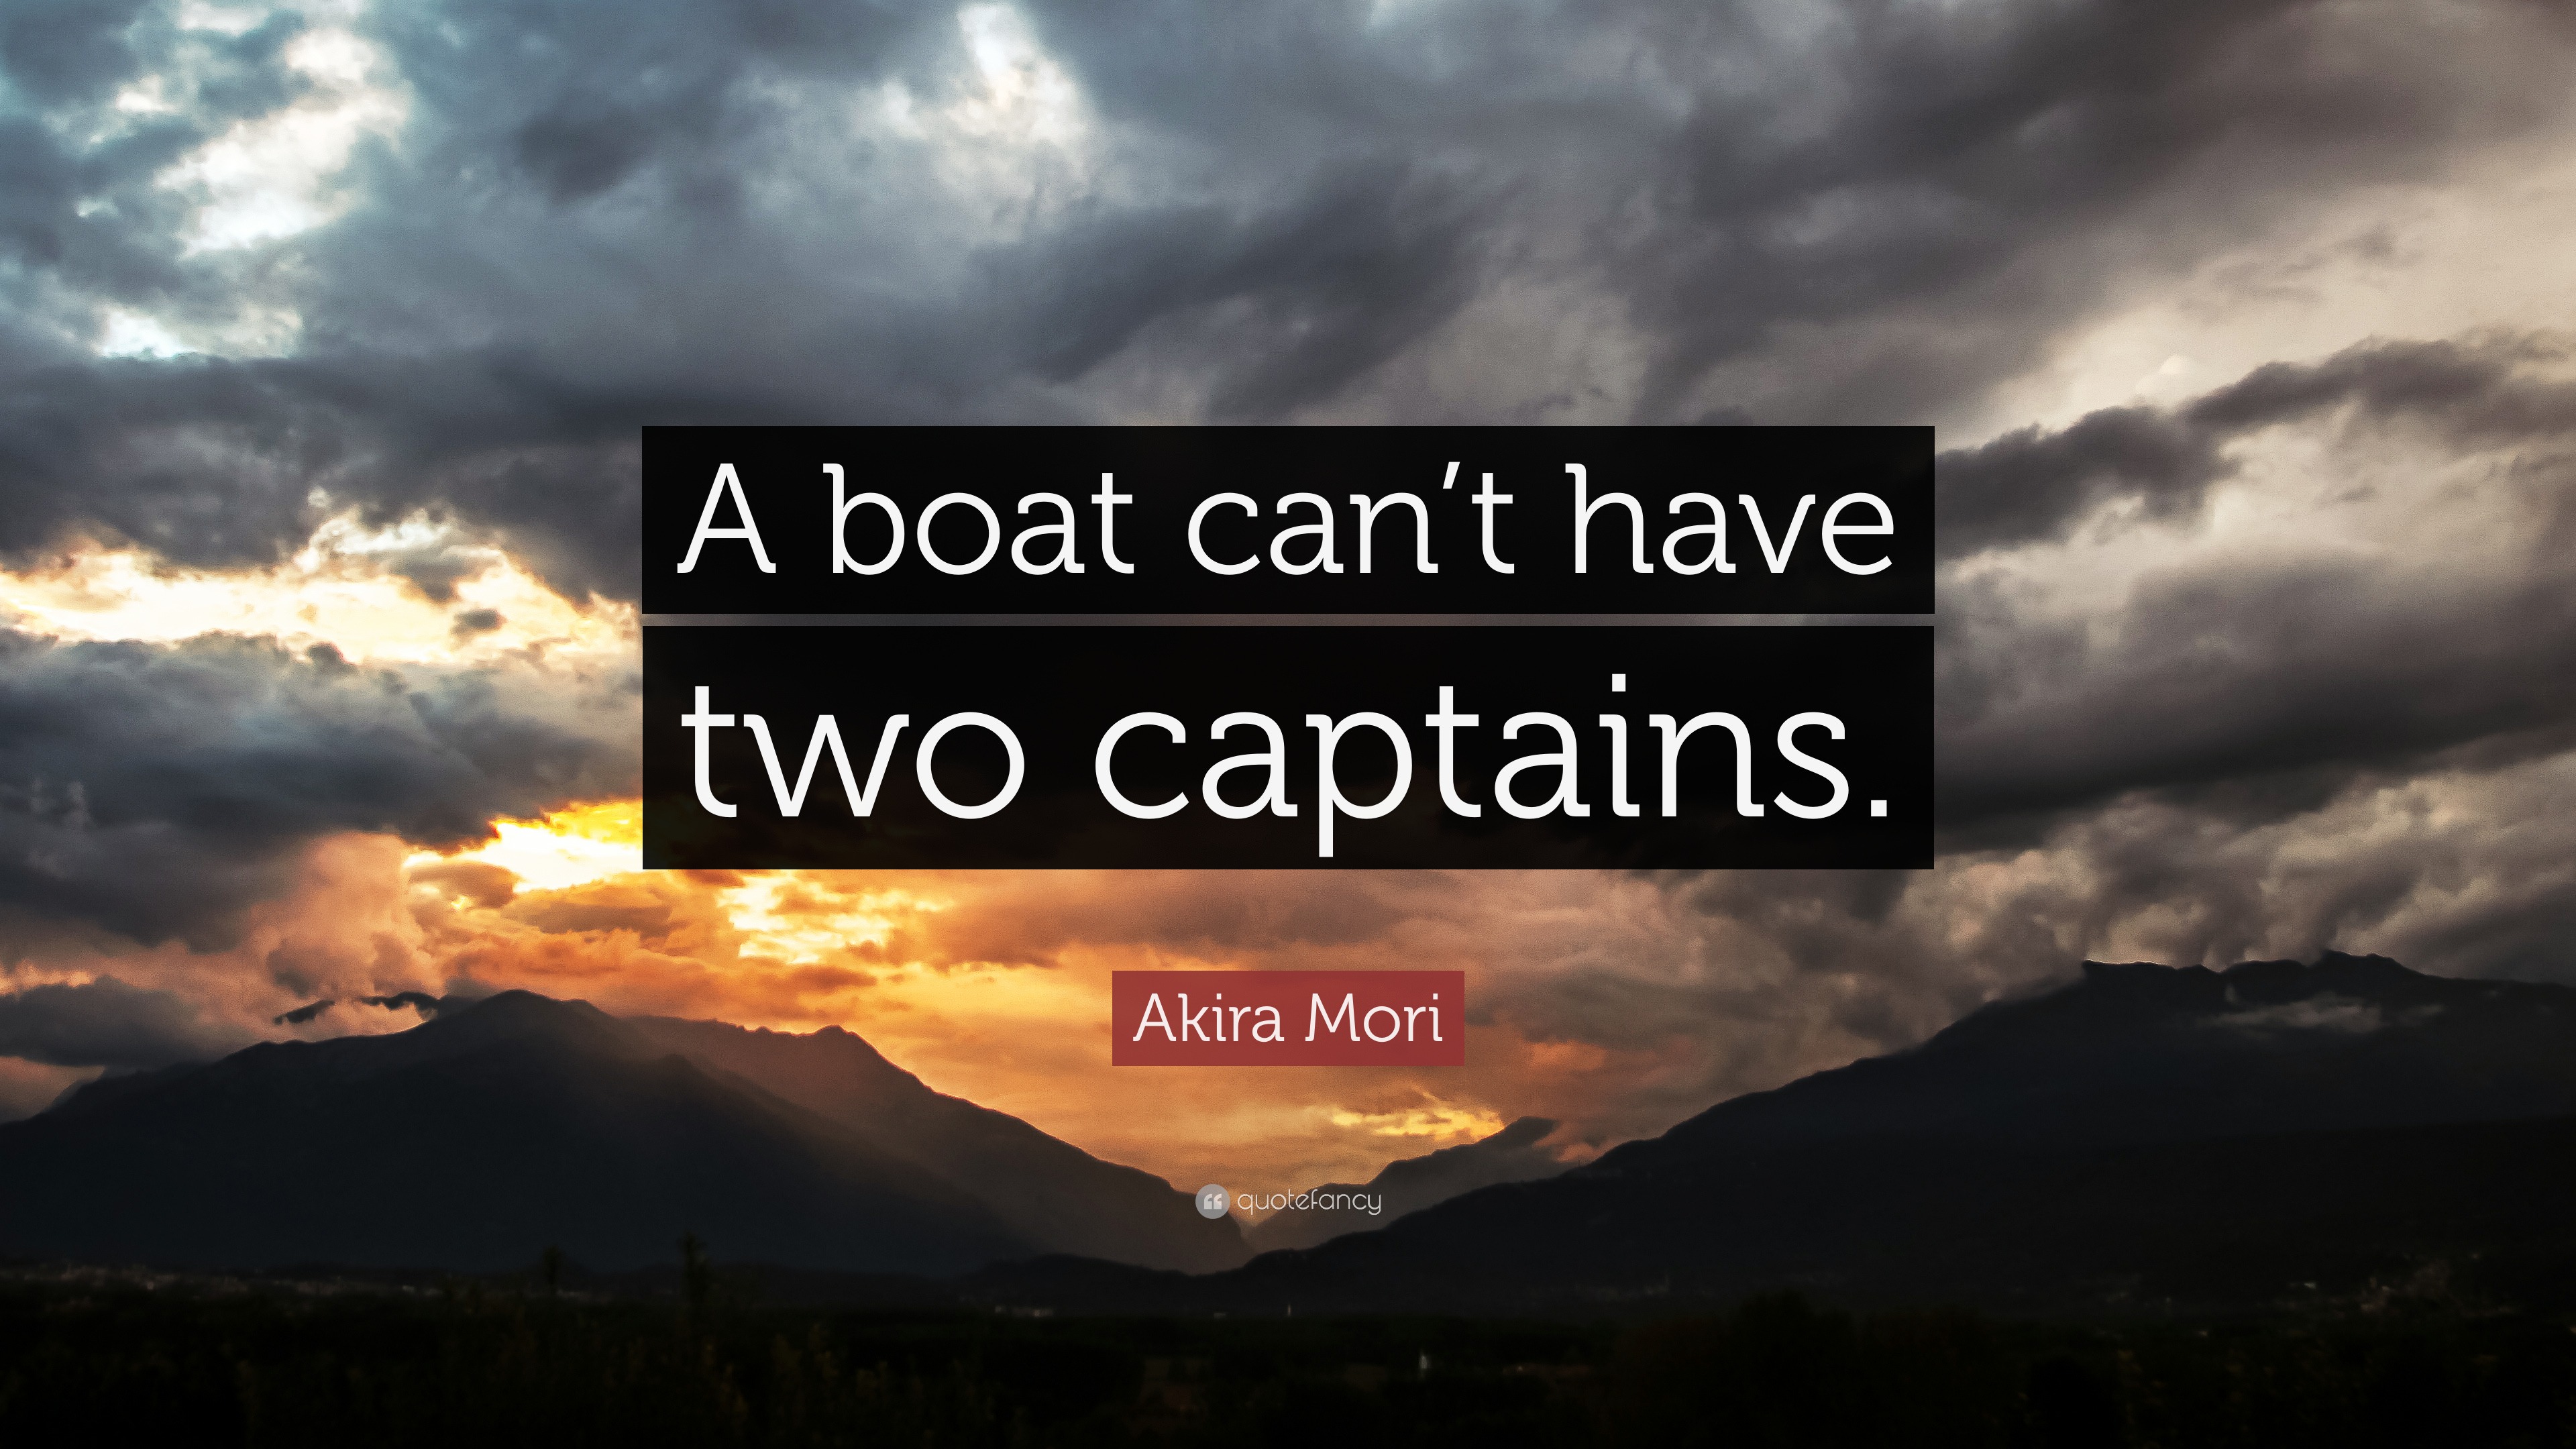 Akira Mori Quote “A boat can’t have two captains.” (9